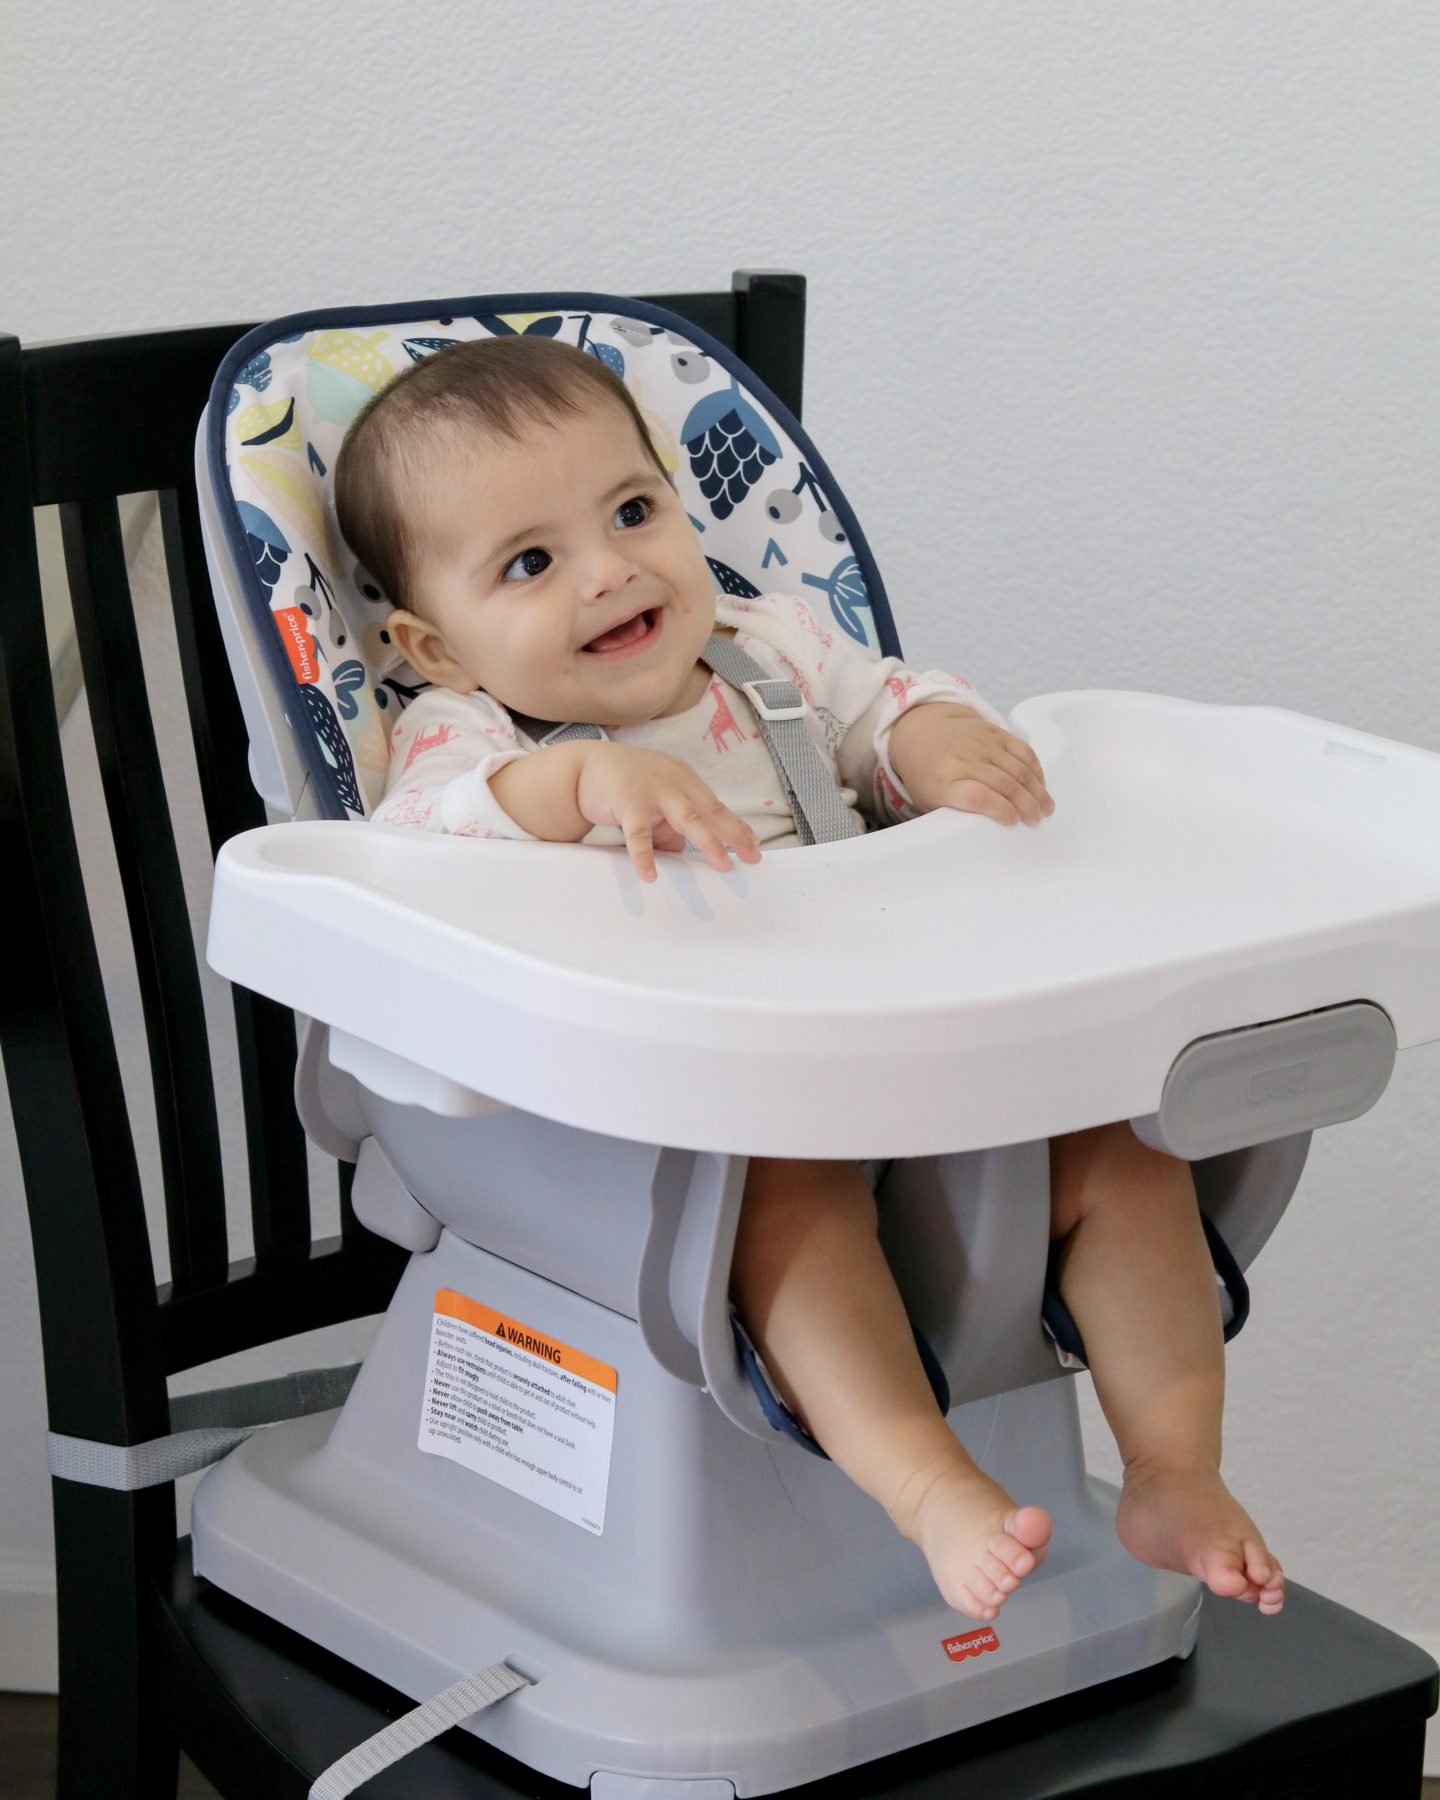 Fischer Price high chair, Target baby month products, high chair review